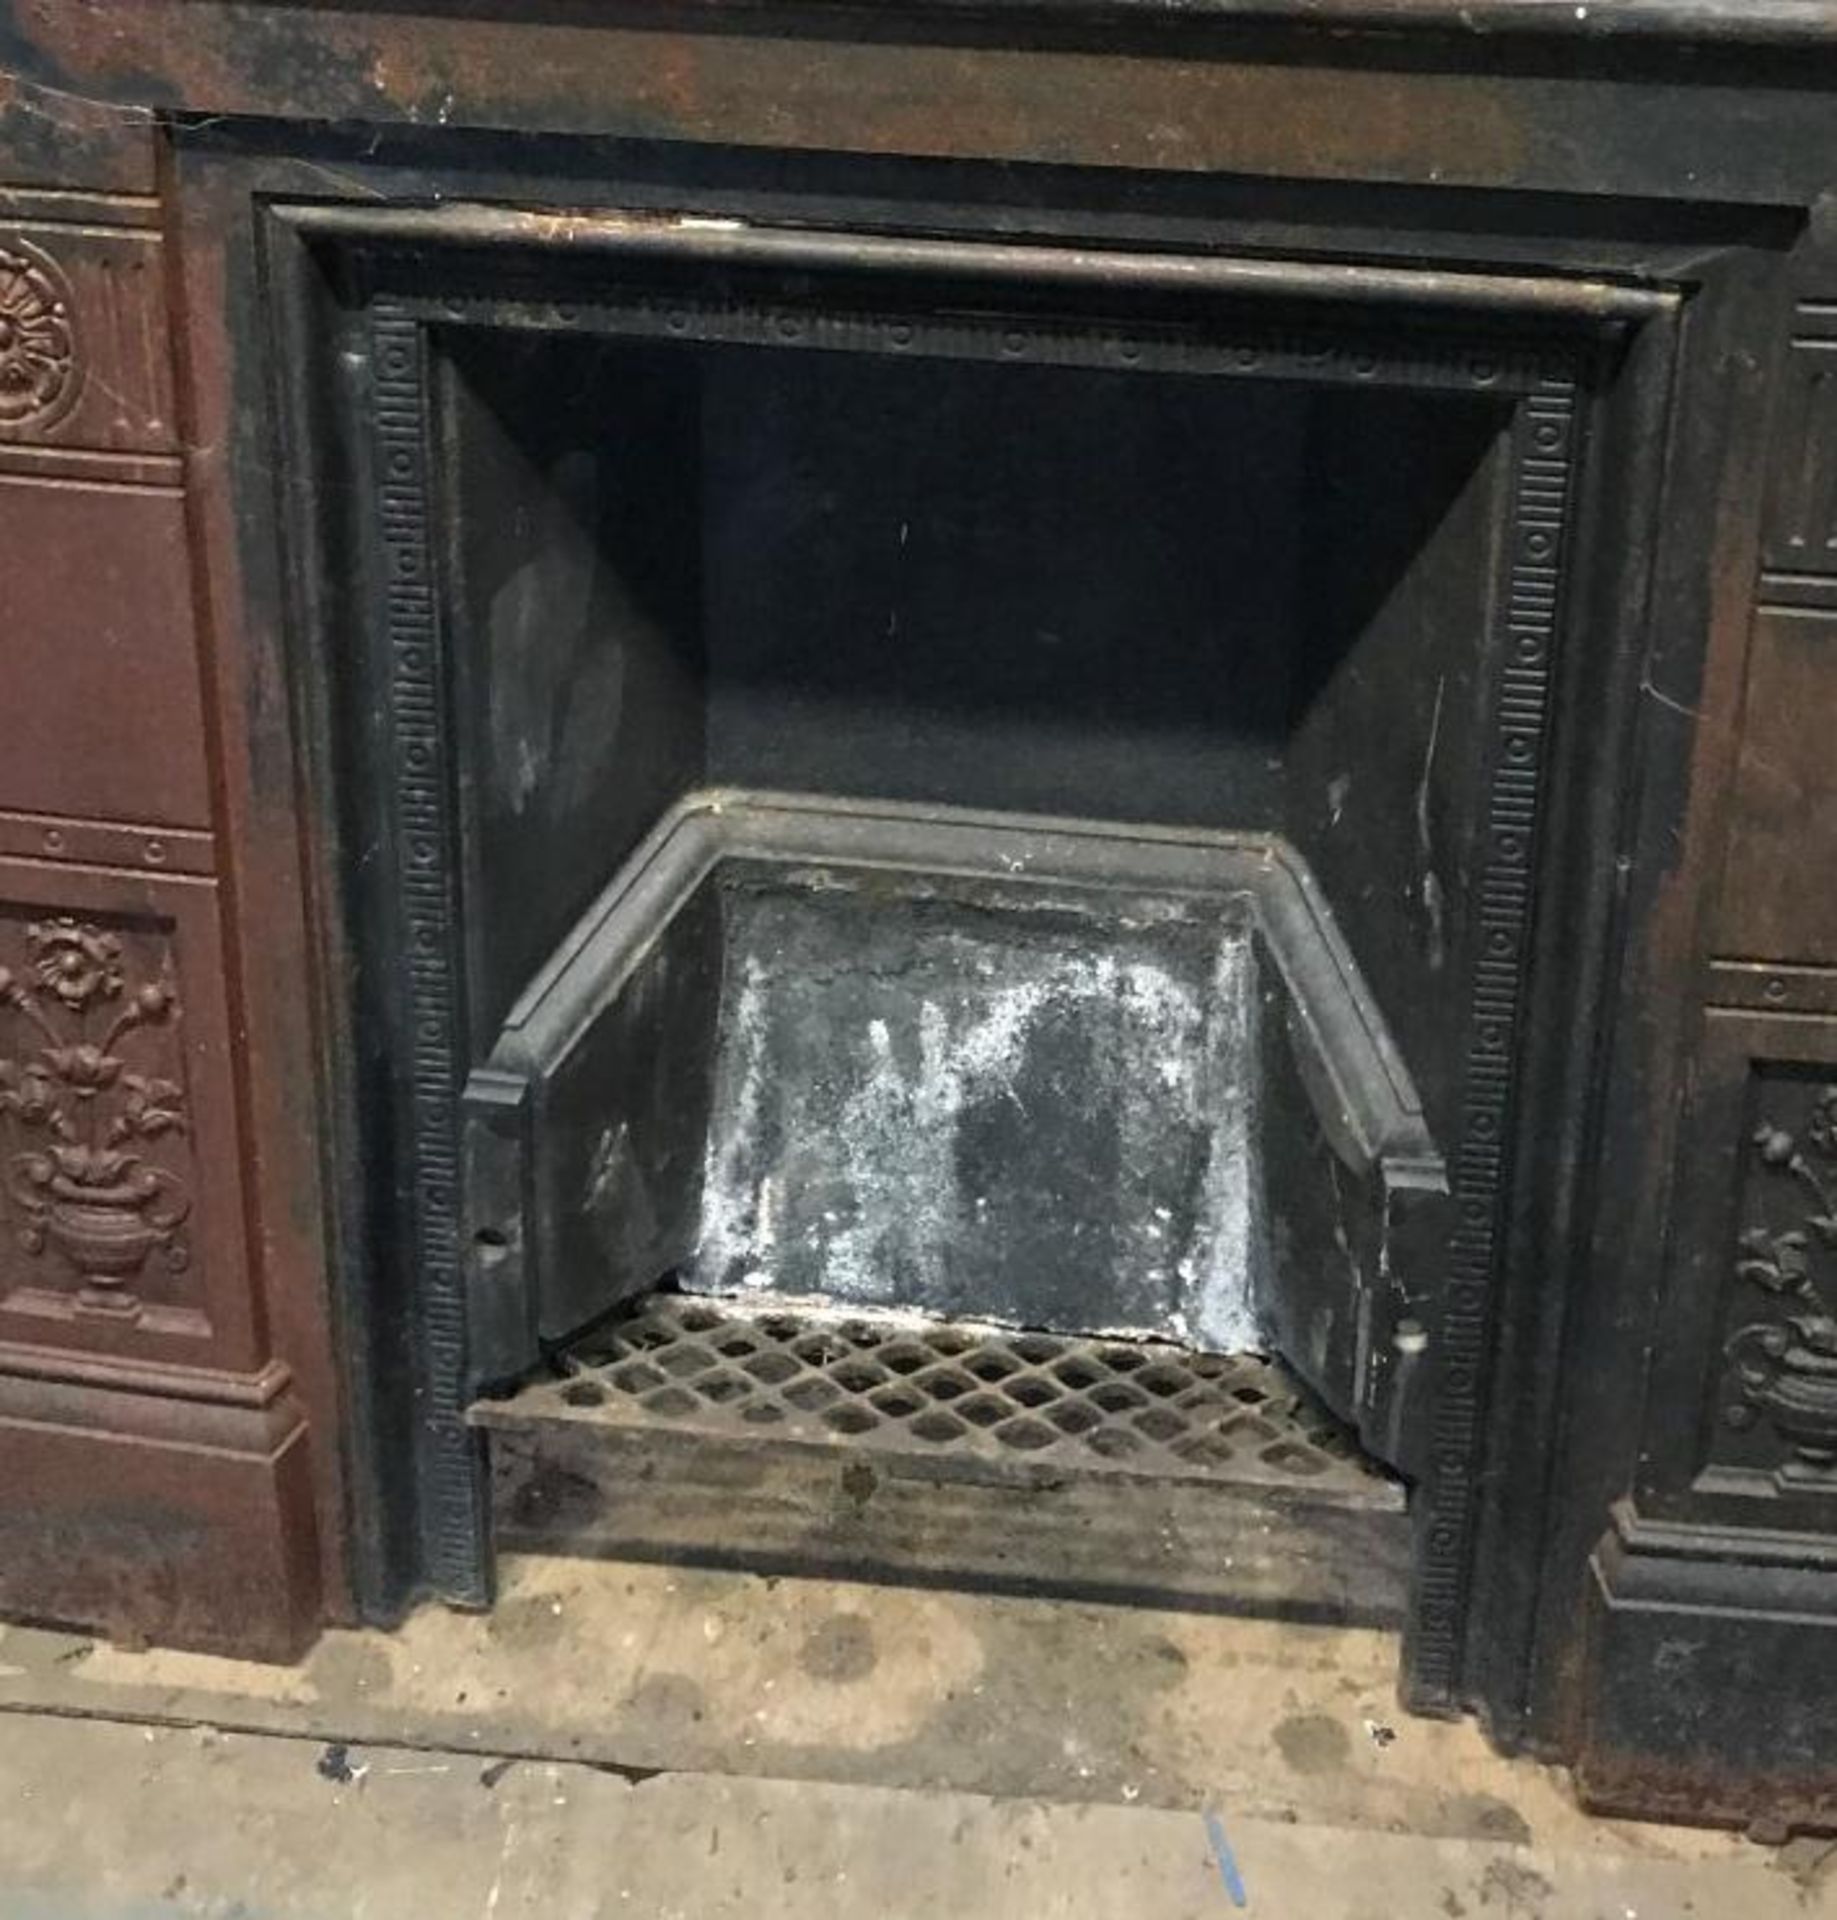 1 x Stunning Antique Victorian Cast Iron Fire Surround With Ornate Sides - Dimensions: Height - Image 2 of 3